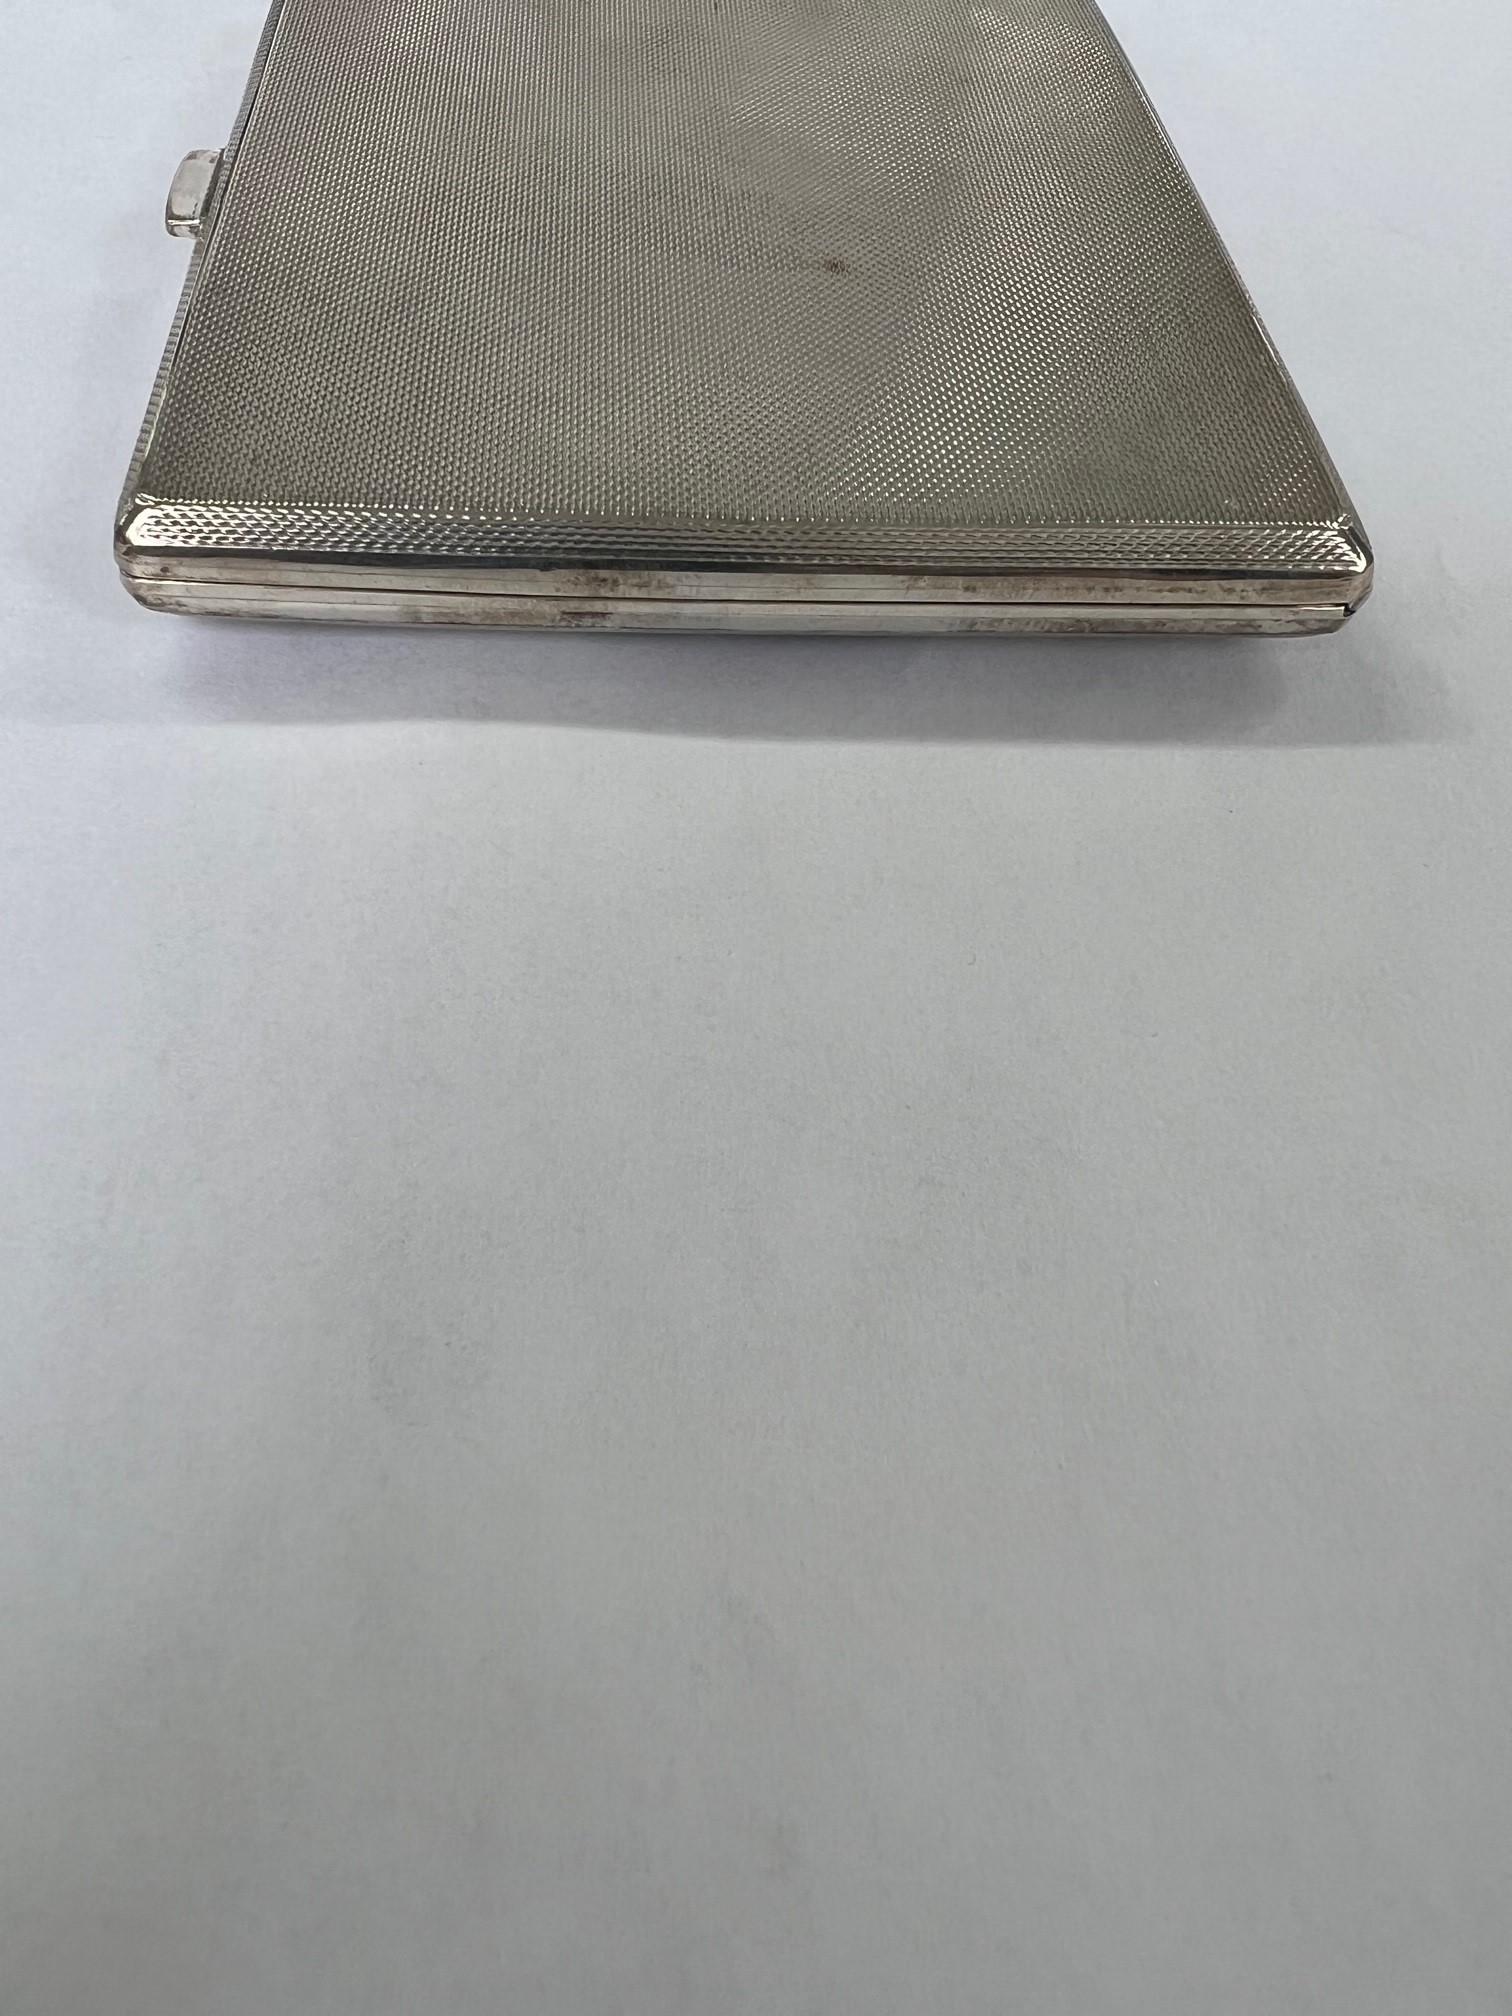 A Goldsmiths & Silversmiths cigarette case of Art Deco style with an enamel & crest decoration, in - Image 6 of 10